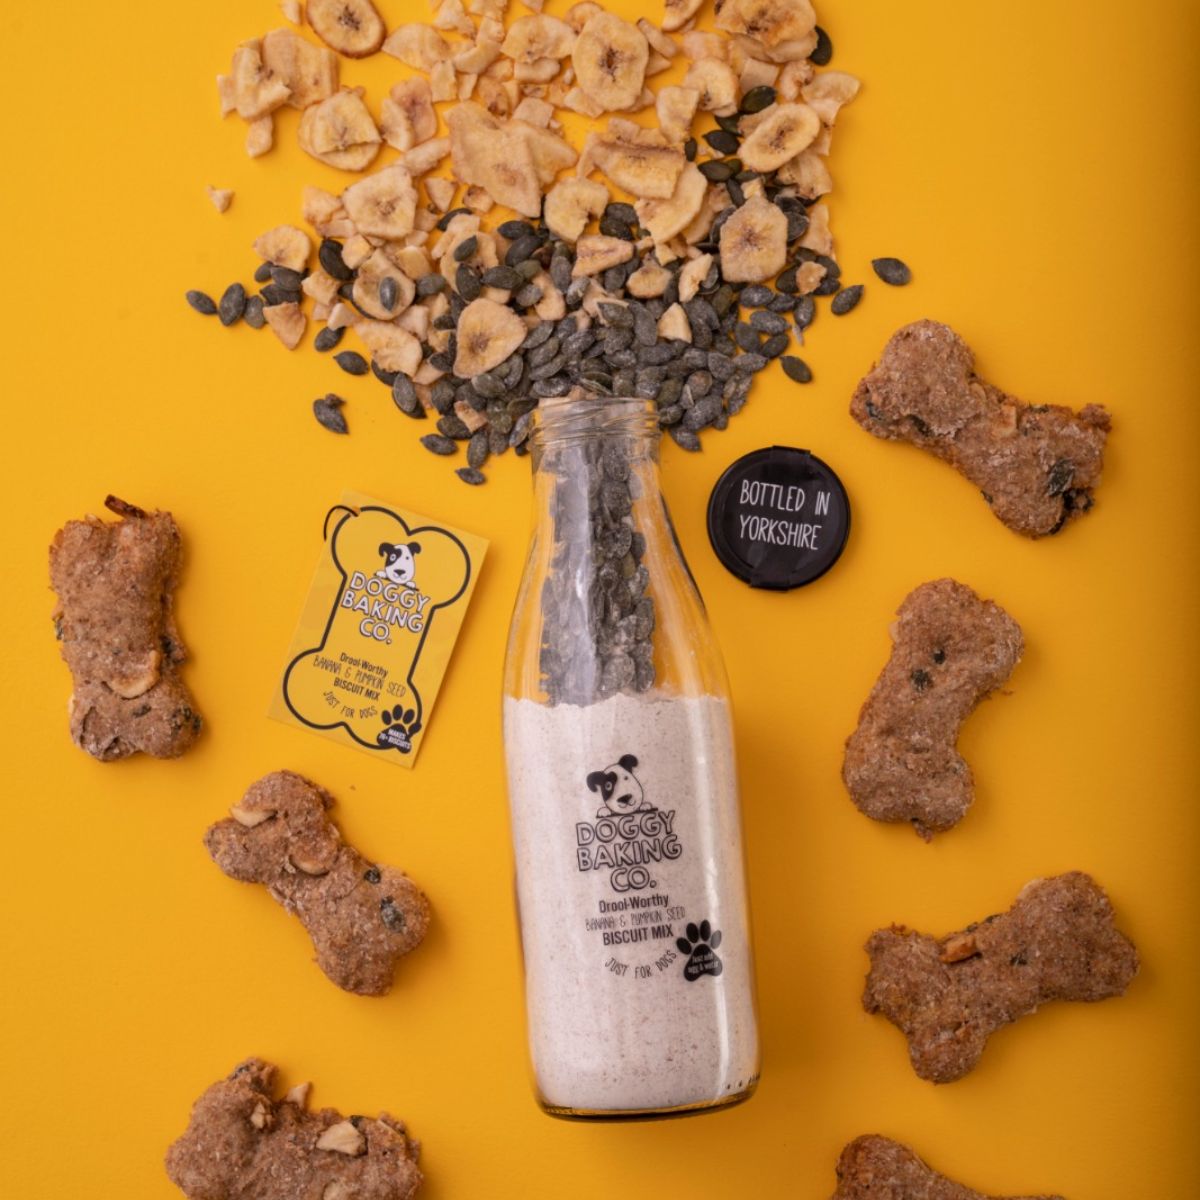 Two Biscuit Bottles, Bone Cutter & Olivewood Chew in a Gift Box - Doggy Baking Co by The Bottled Baking Co